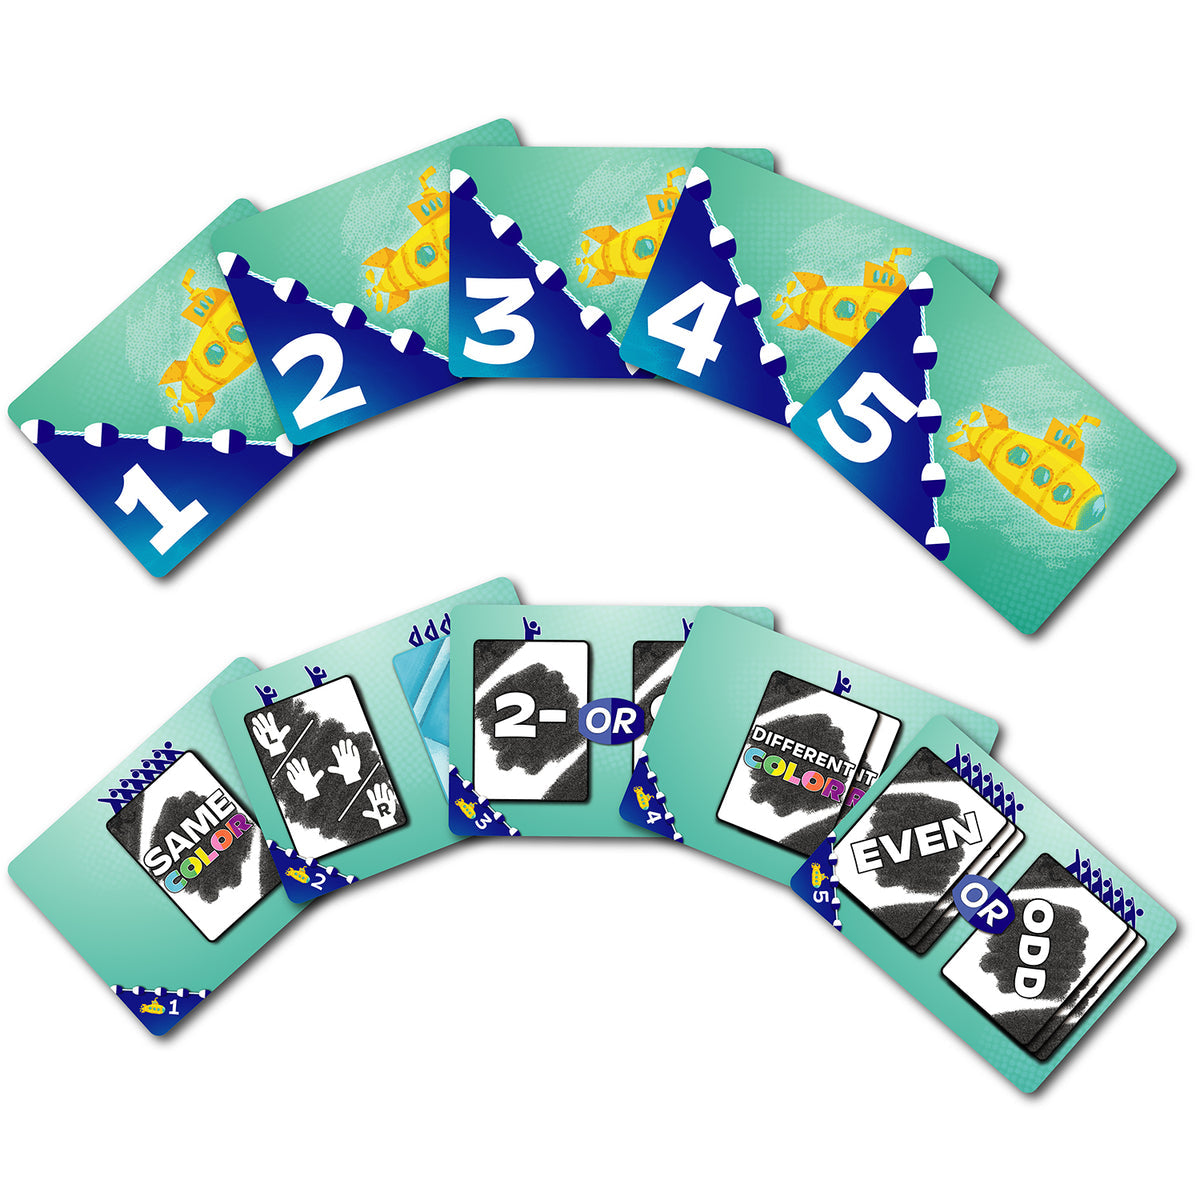 Sync or Swim - A Teamwork-Based Synchronized Swimming Card Game - Bards & Cards